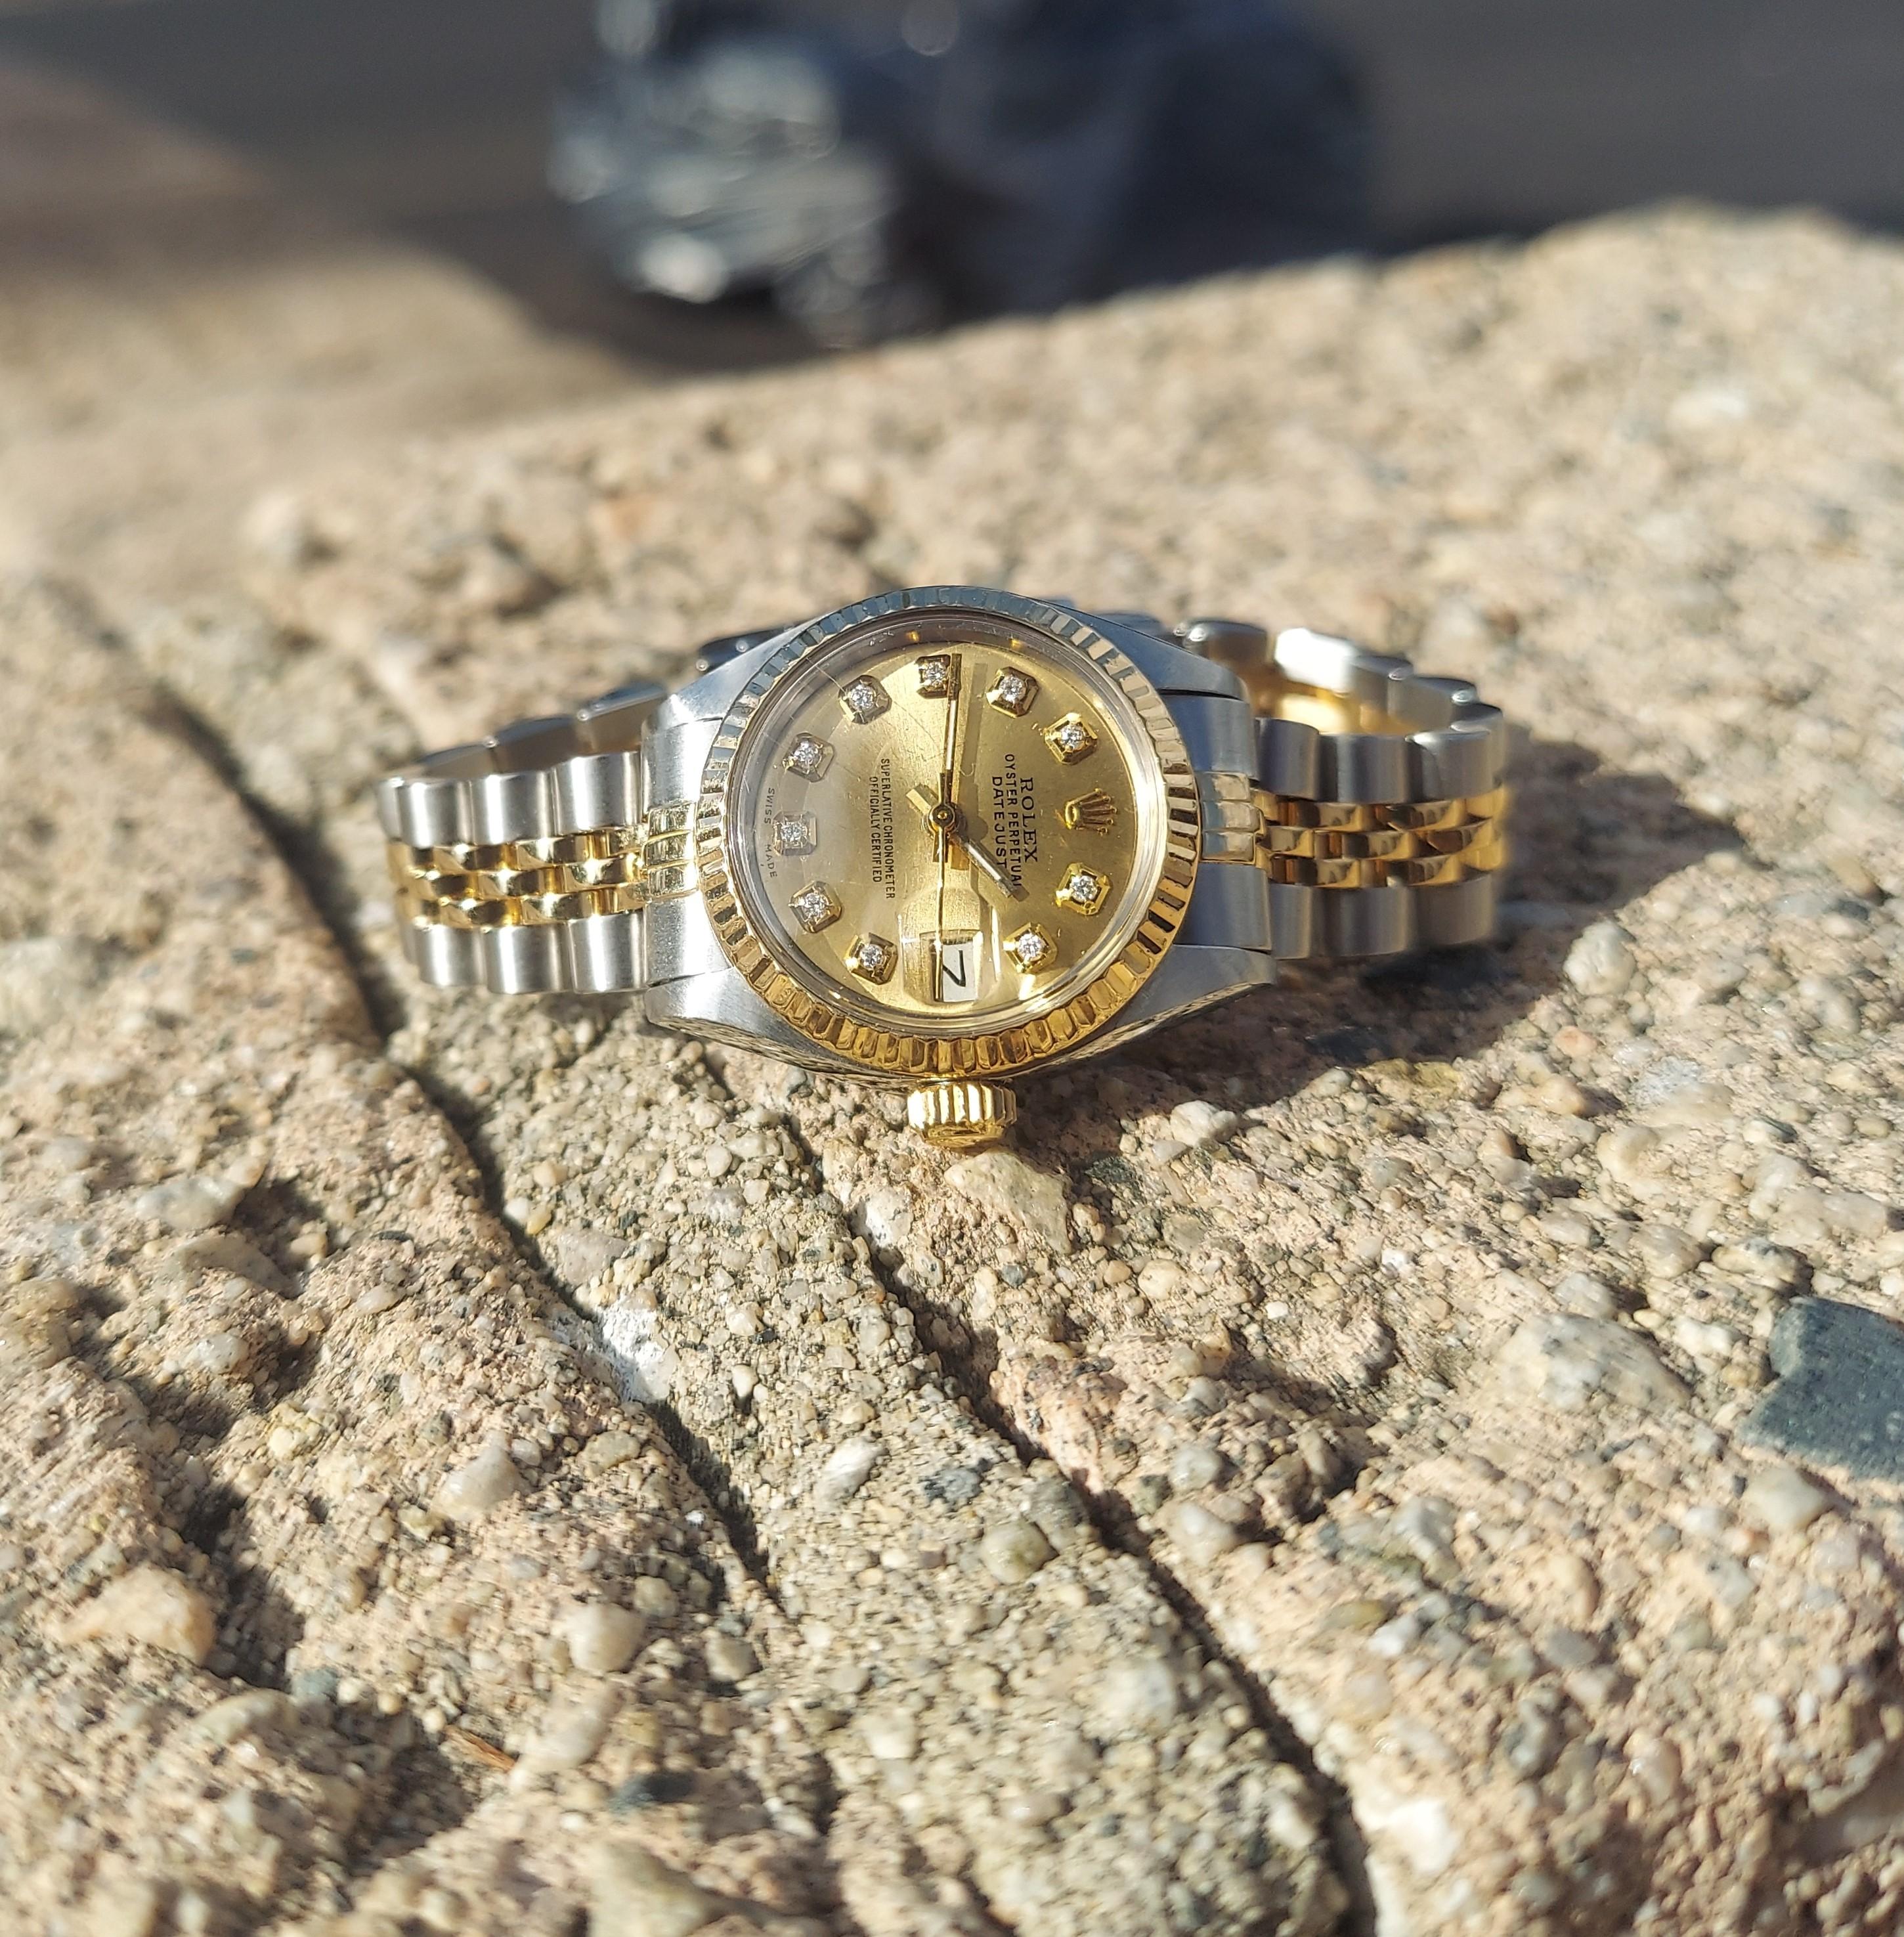 Brand - Rolex
Gender - Ladies
Model - 6917 datejust
Condition - pre owned
Metals - Yellow Gold/Stainless steel
Case size - 26mm
Bezel - Yellow gold fluted
Crystal - New Acrylic
Movement - Automatic cal 2030
Dial - Champagne Diamond
Wrist band -